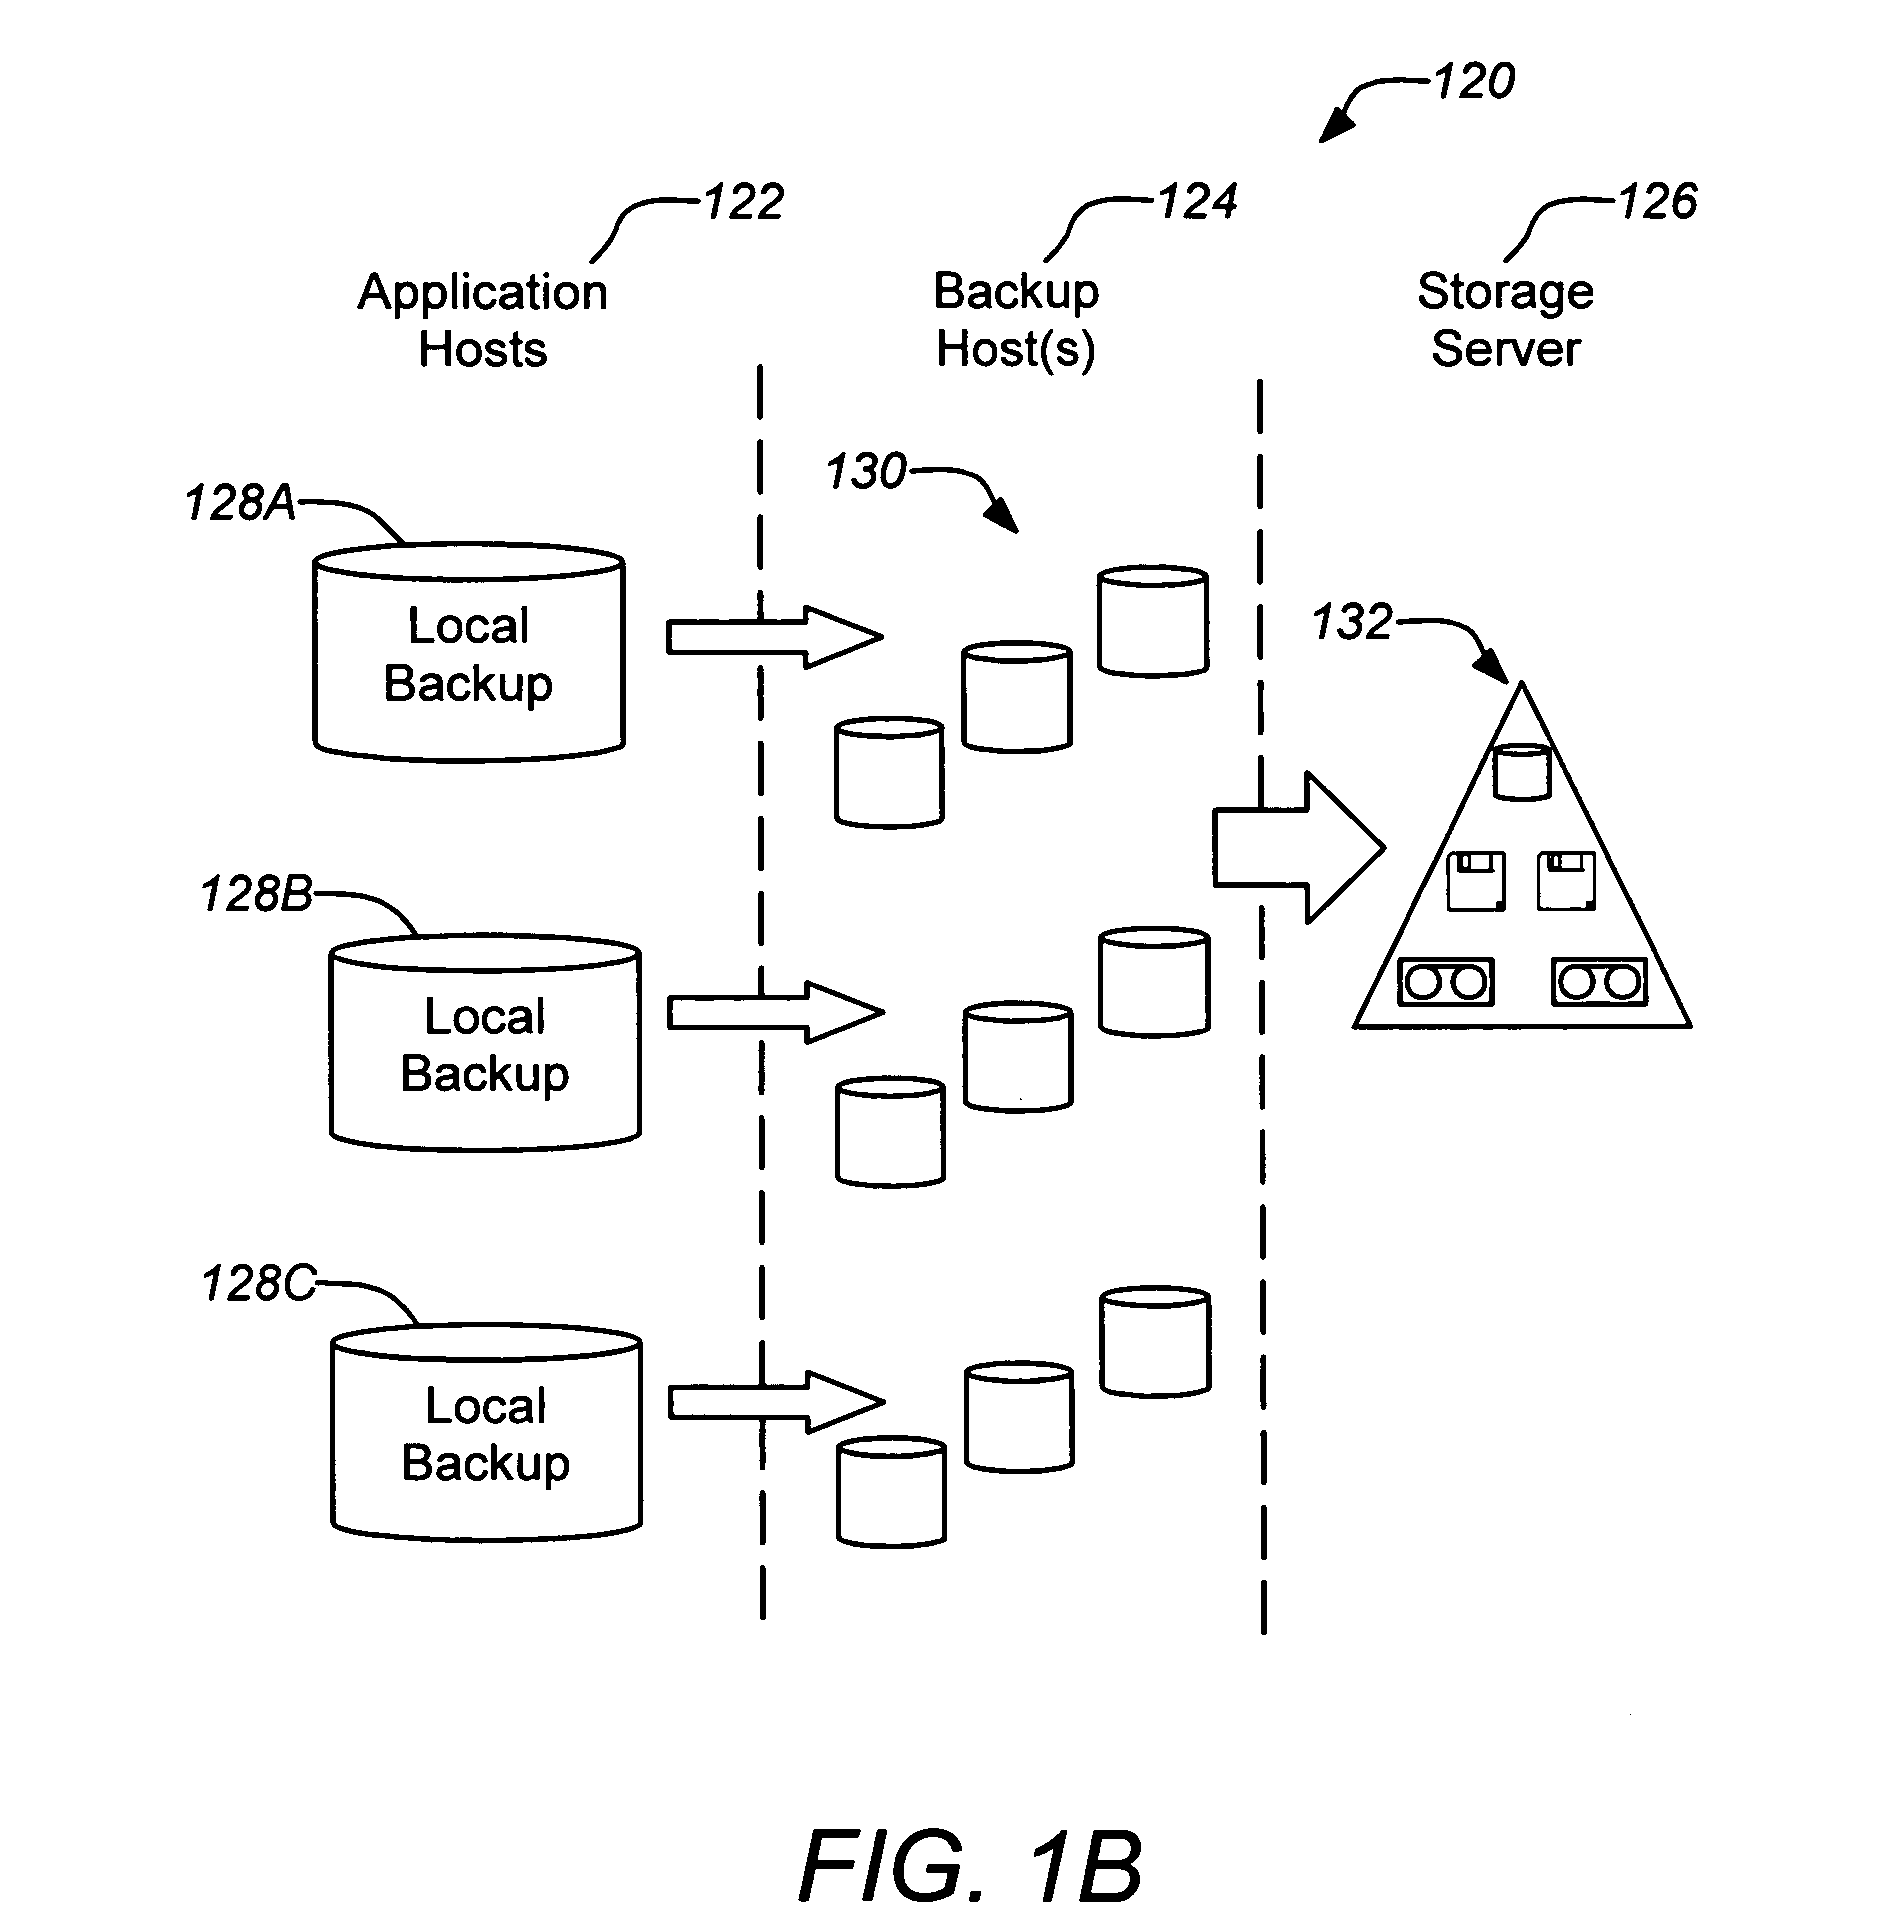 Coordinated federated backup of a distributed application environment